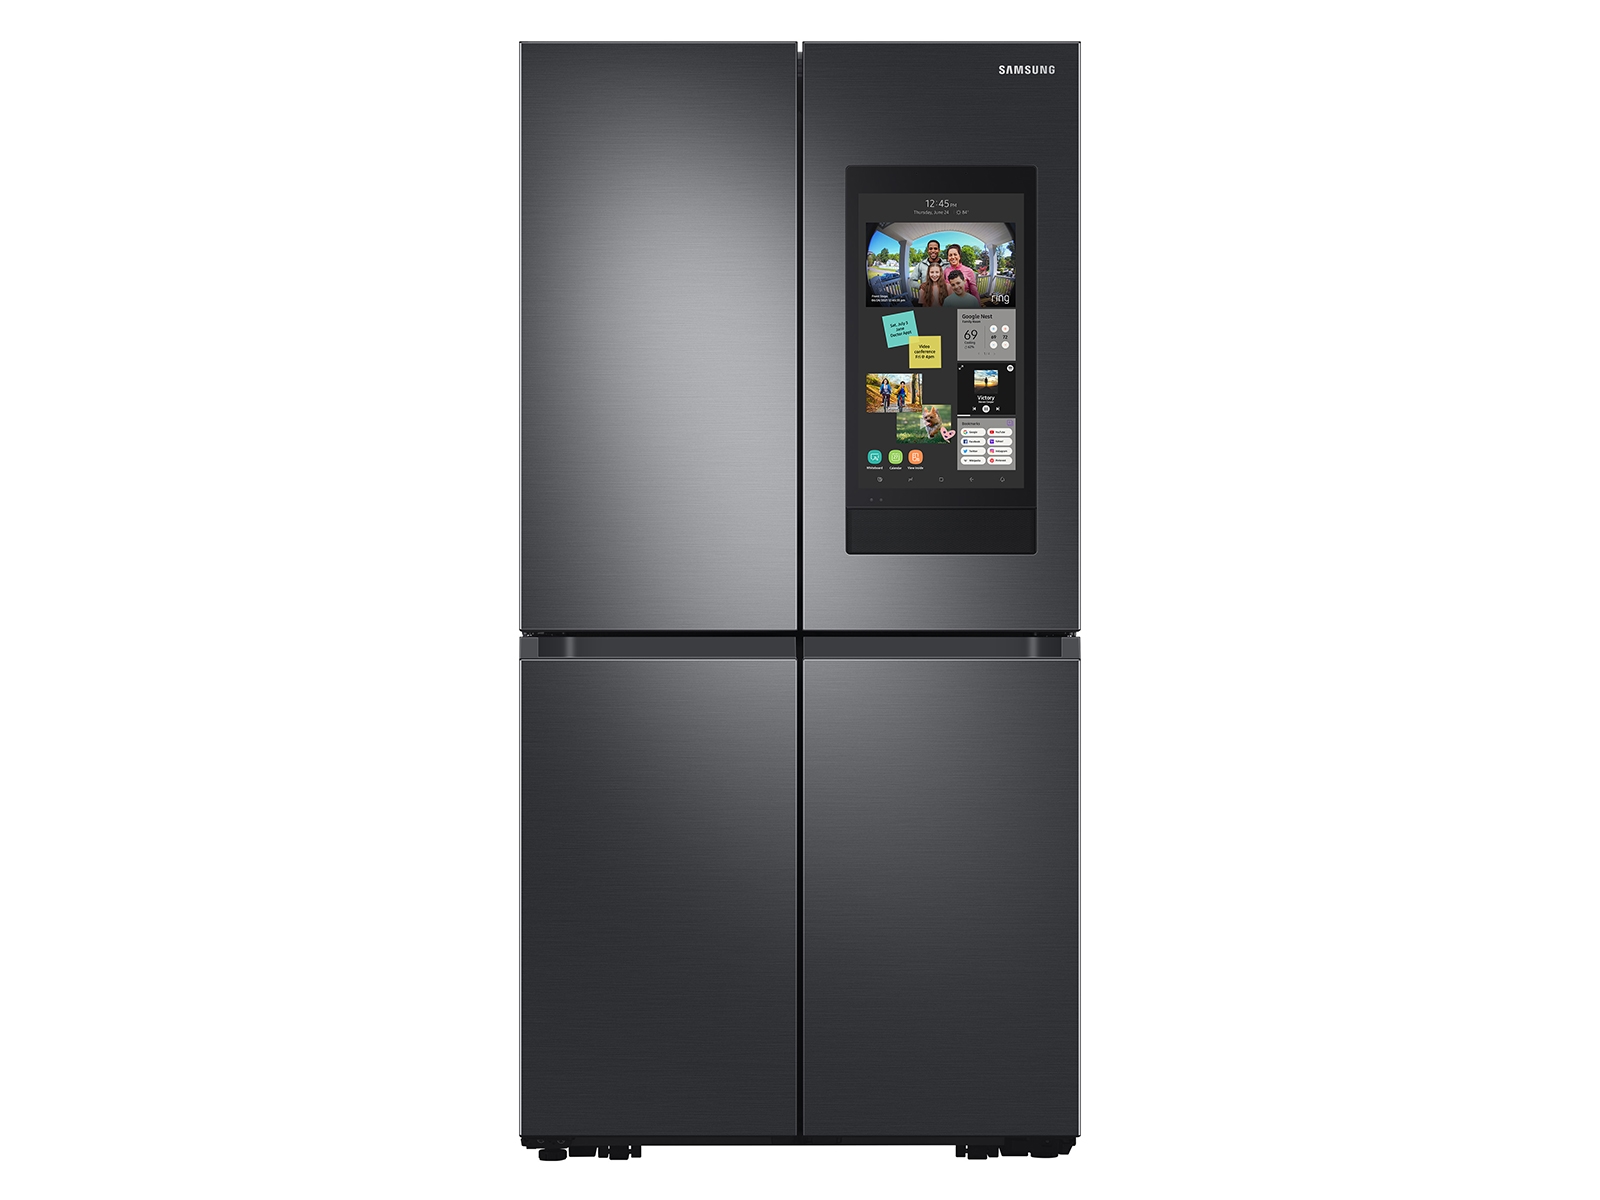 29 cu. ft. Family Hub™ 4-Door refrigerator, gas range, convection microwave and Smart Linear dishwasher package in Black Stainless Steel